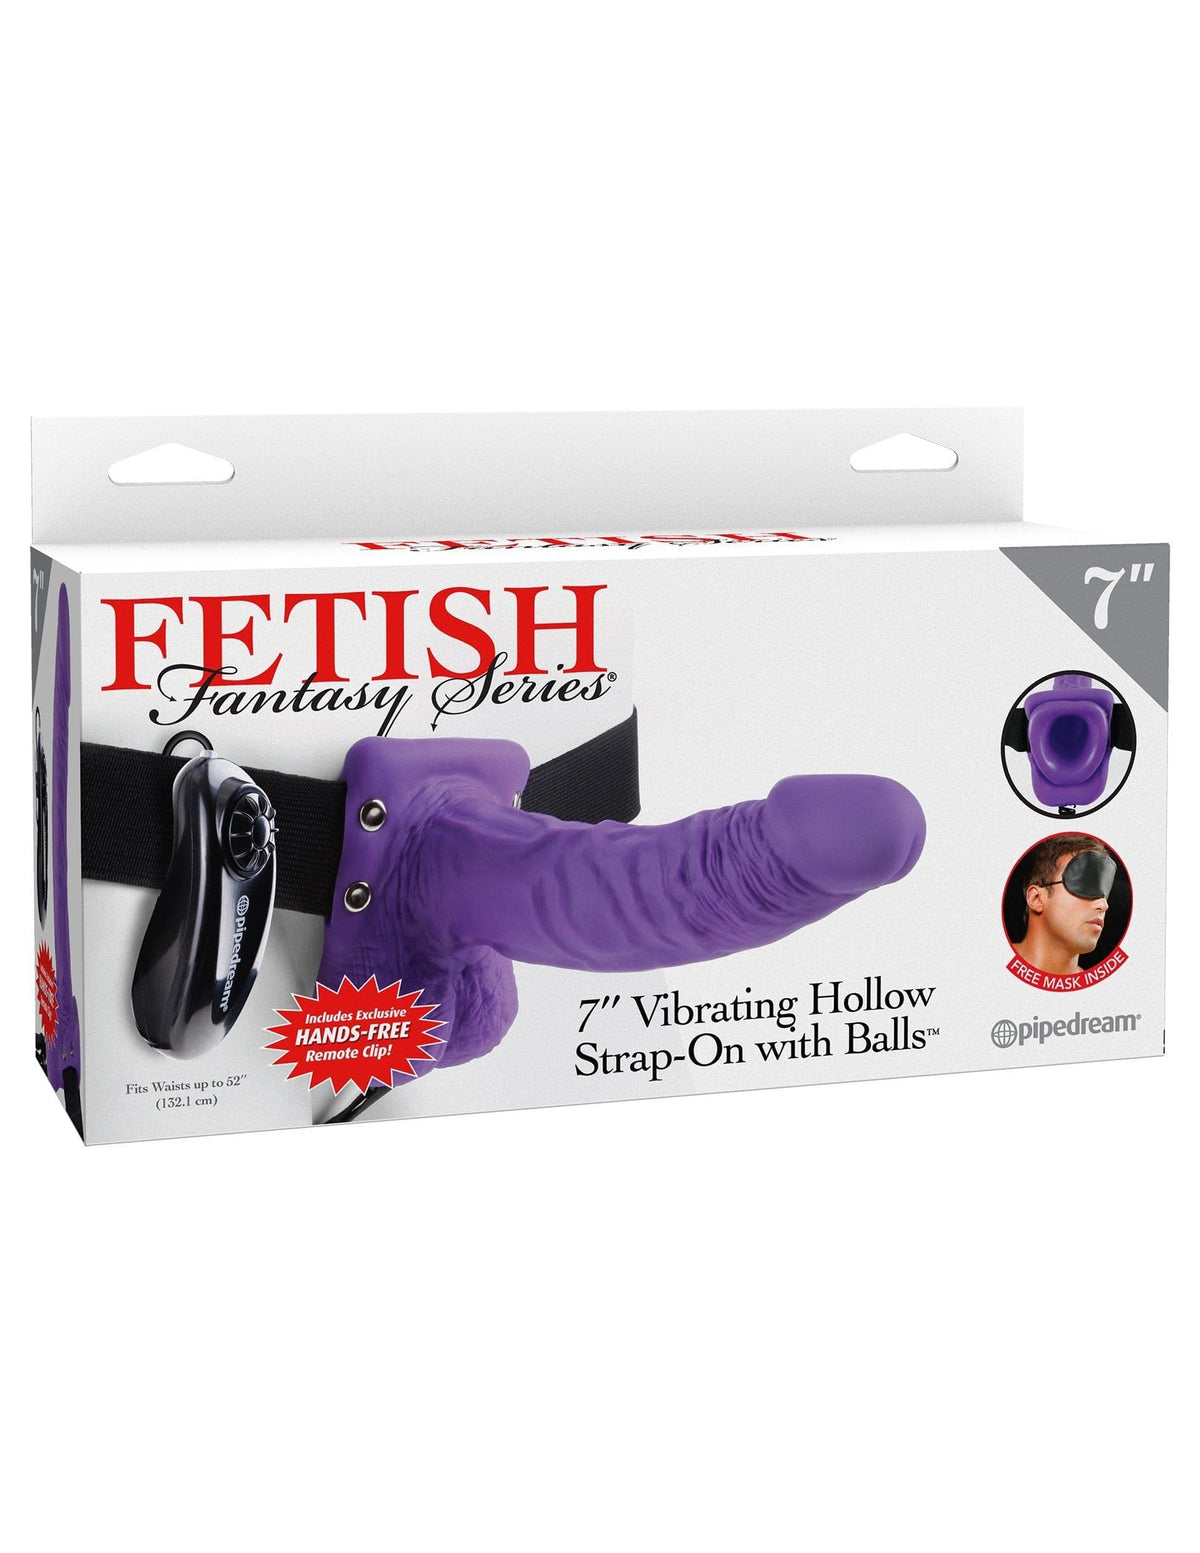 fetish fantasy series 7 inch vibrating hollow strap on with balls